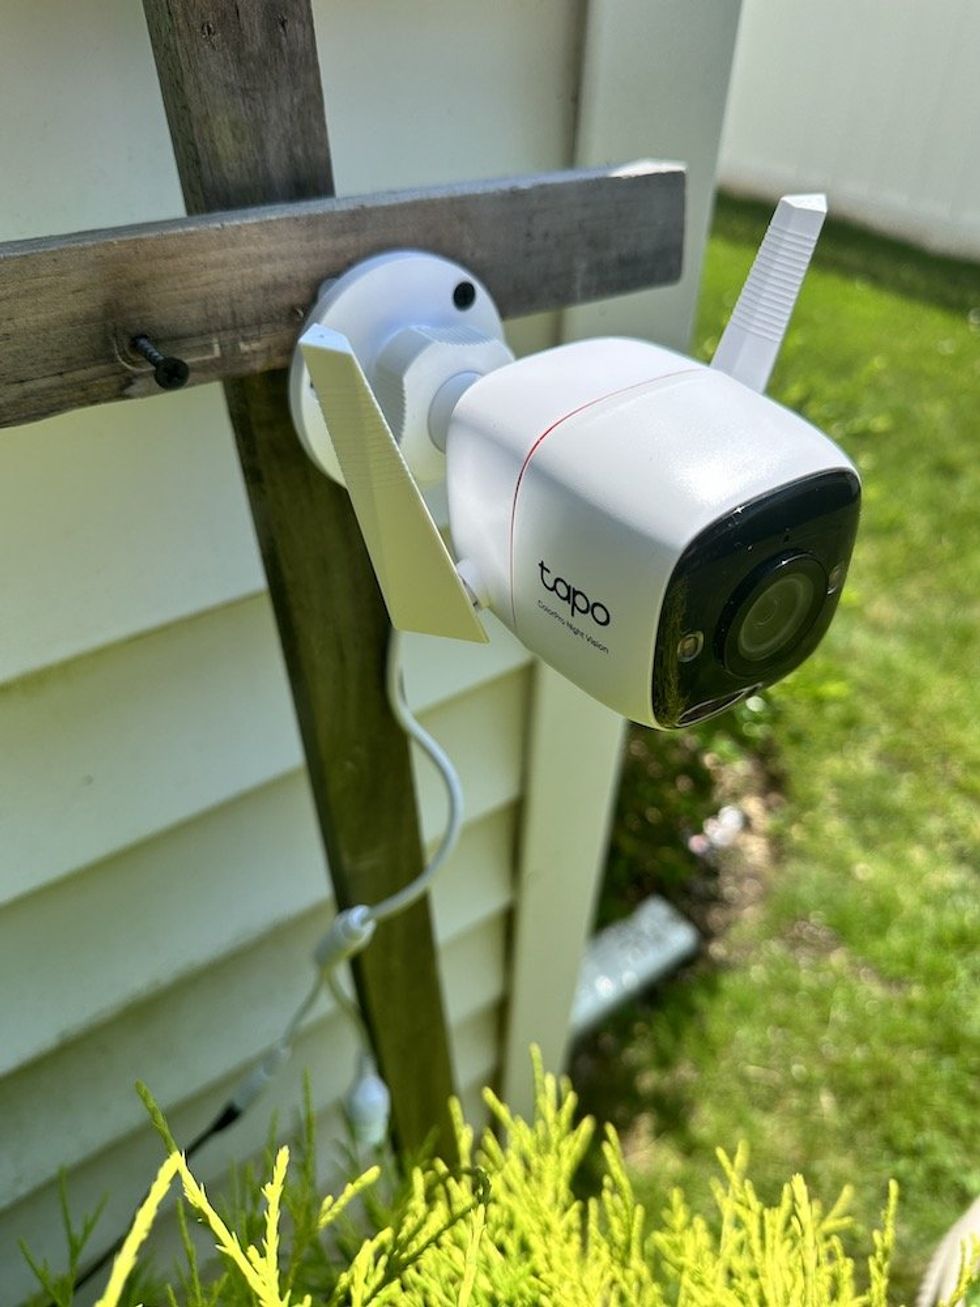 Tapo Outdoor Security Camera Unboxing and Setup Video: Tapo C310 